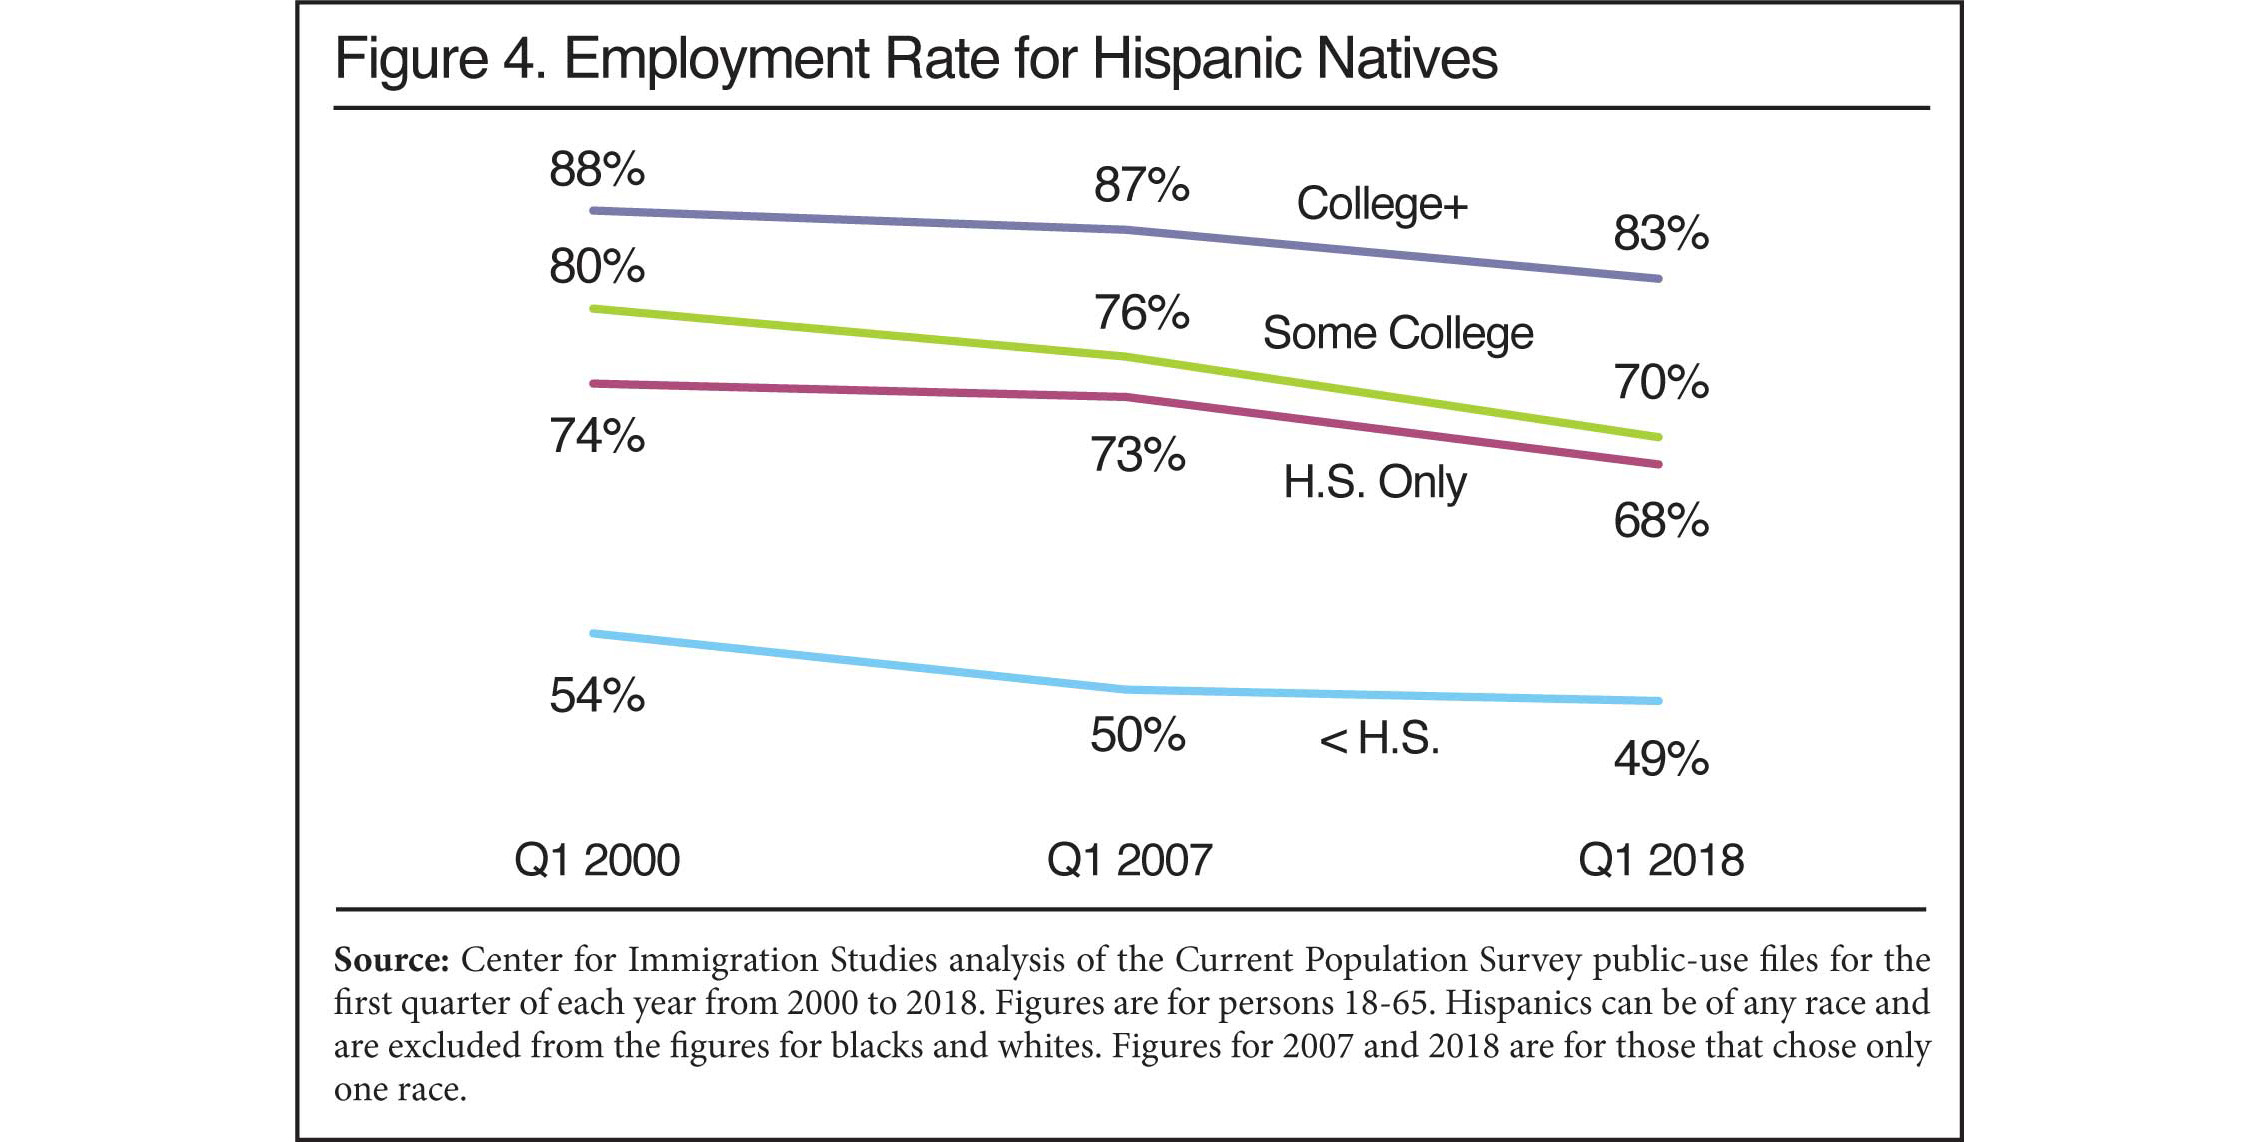 Graph: Employment Rate for Hispanic Natives, 2000 to 2018